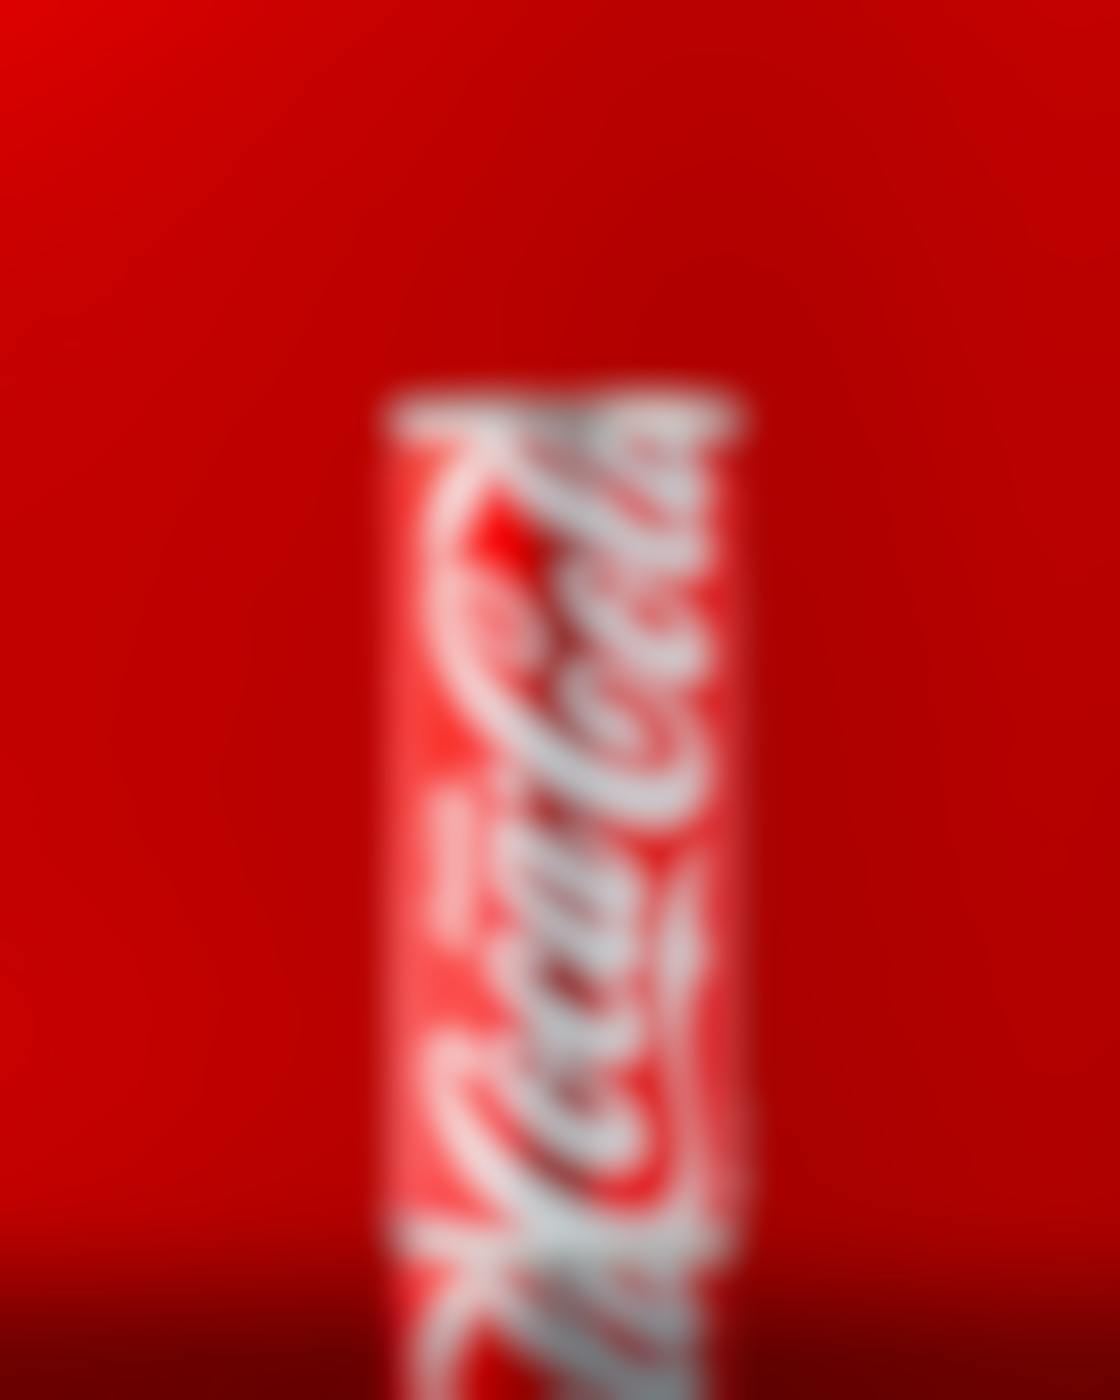 A slim can of Coca-Cola against a red background